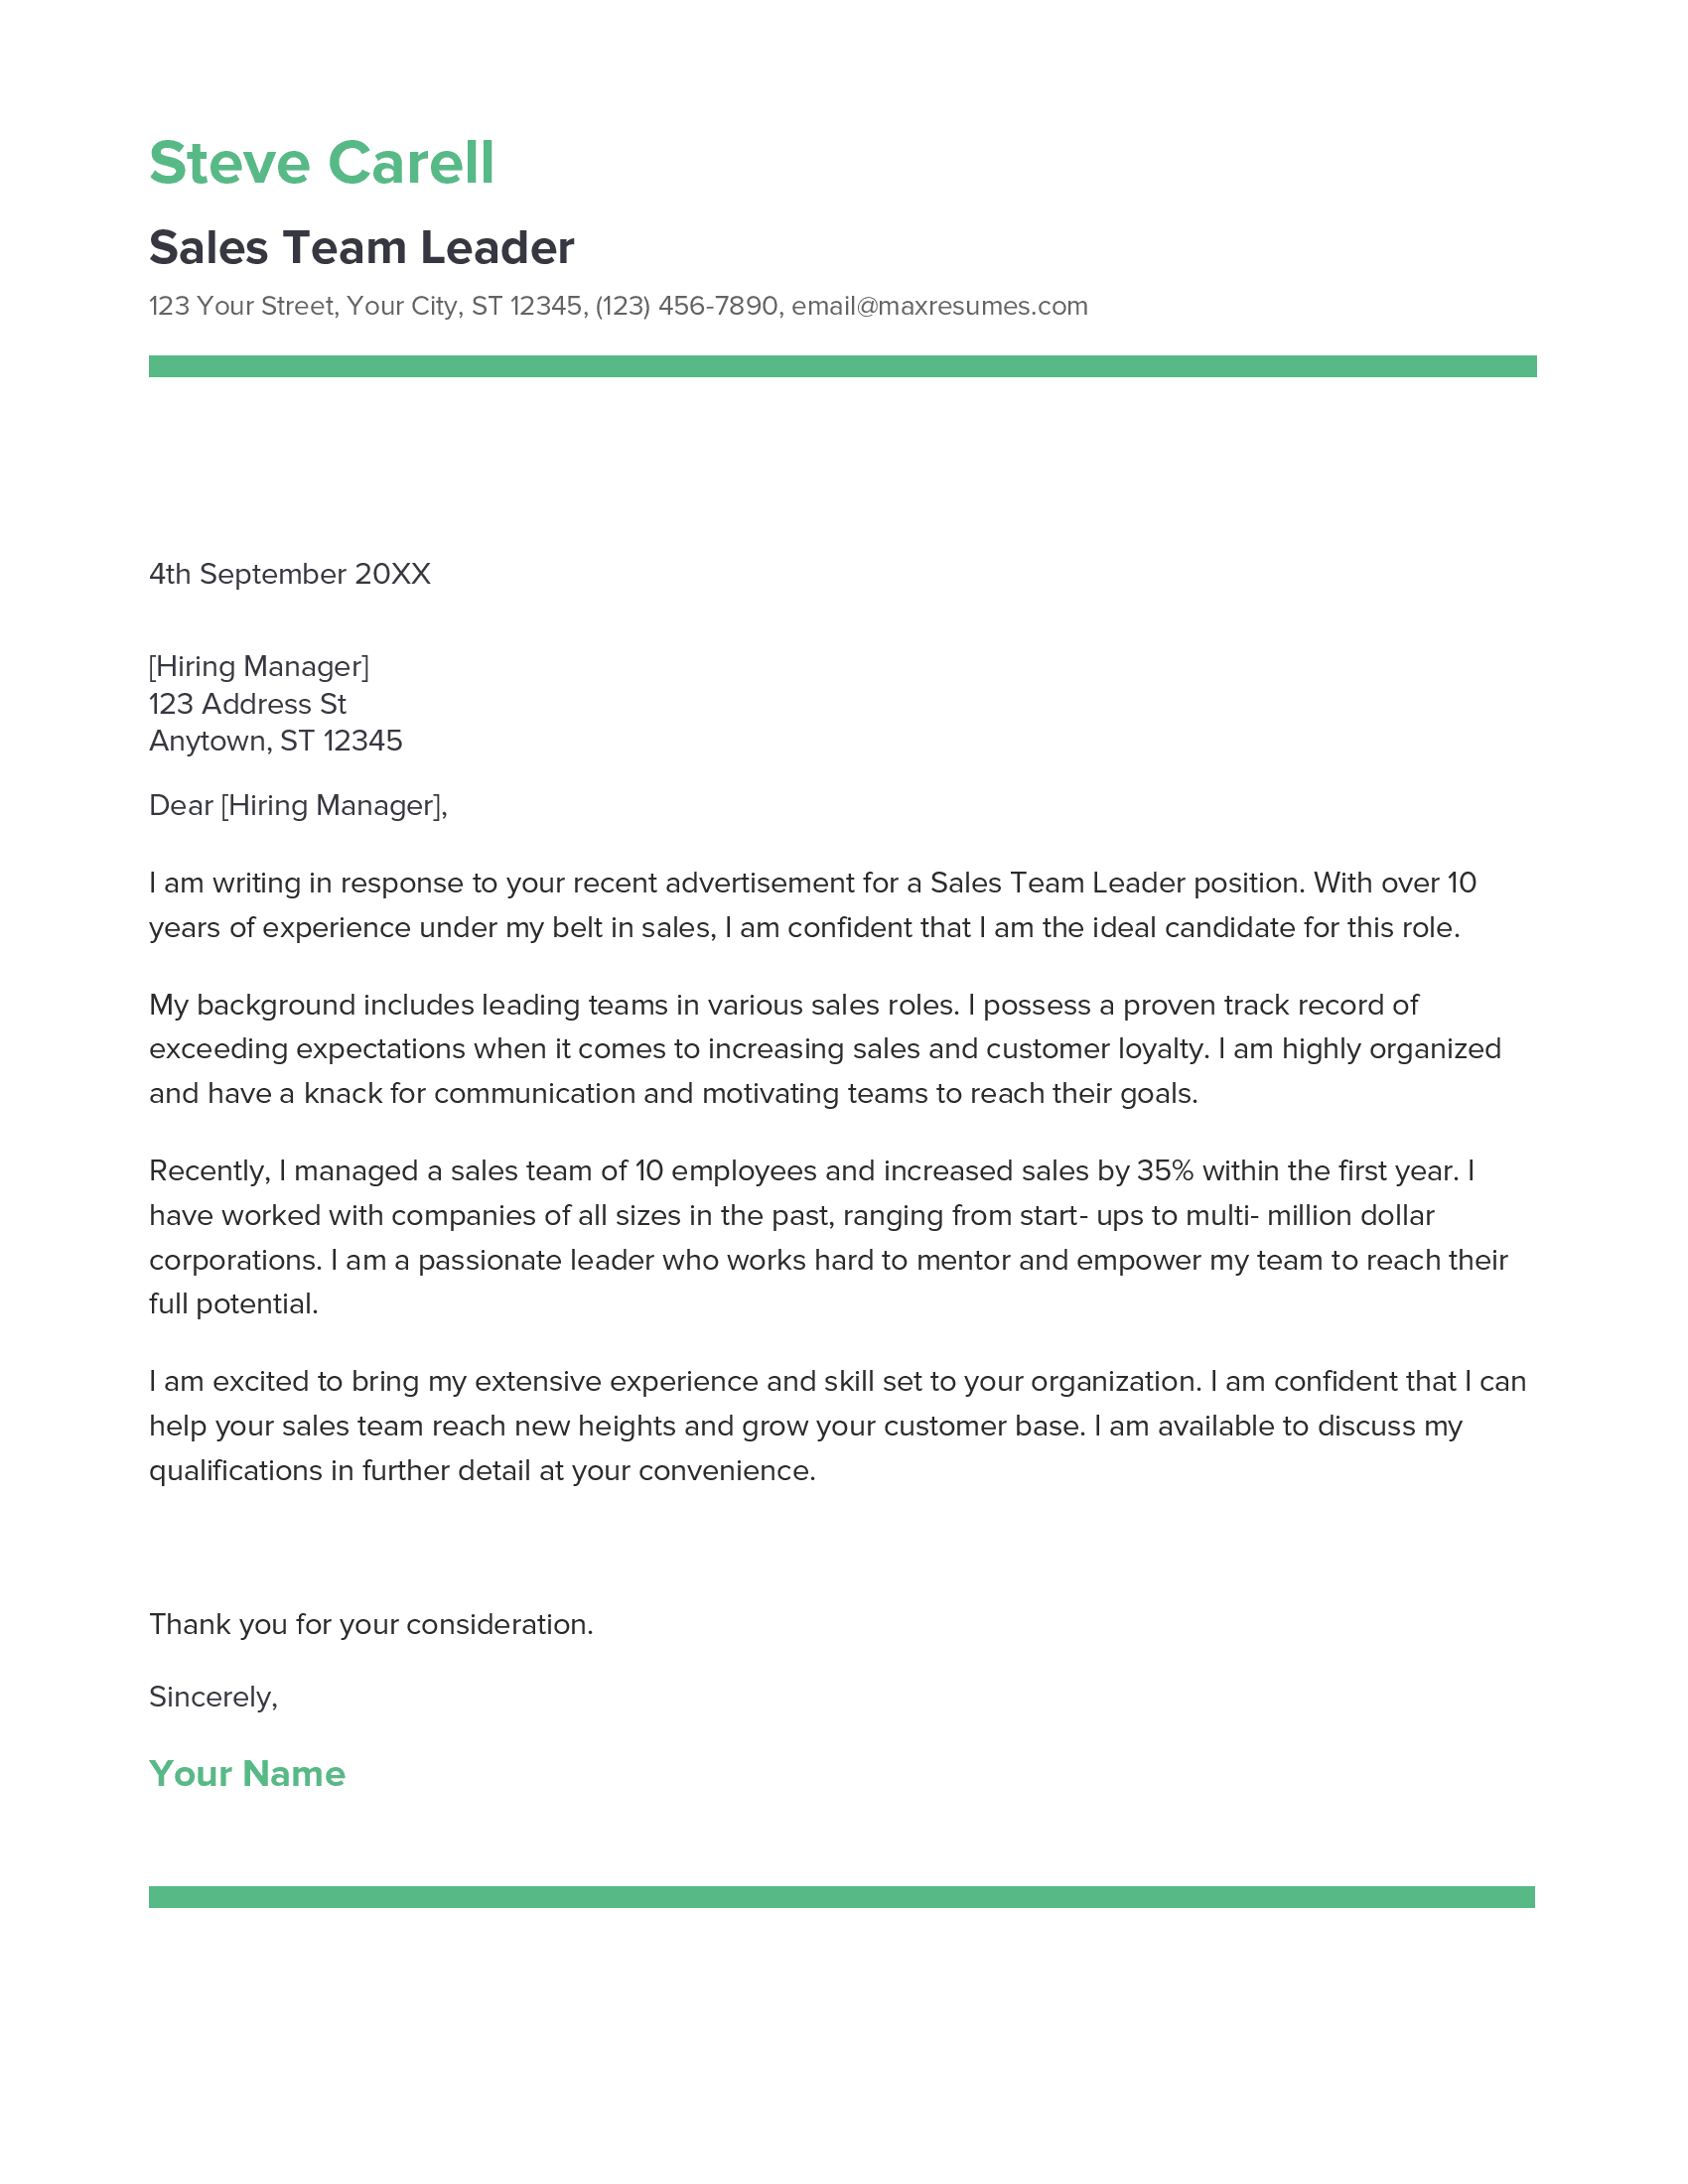 Sales Team Leader Cover Letter Example